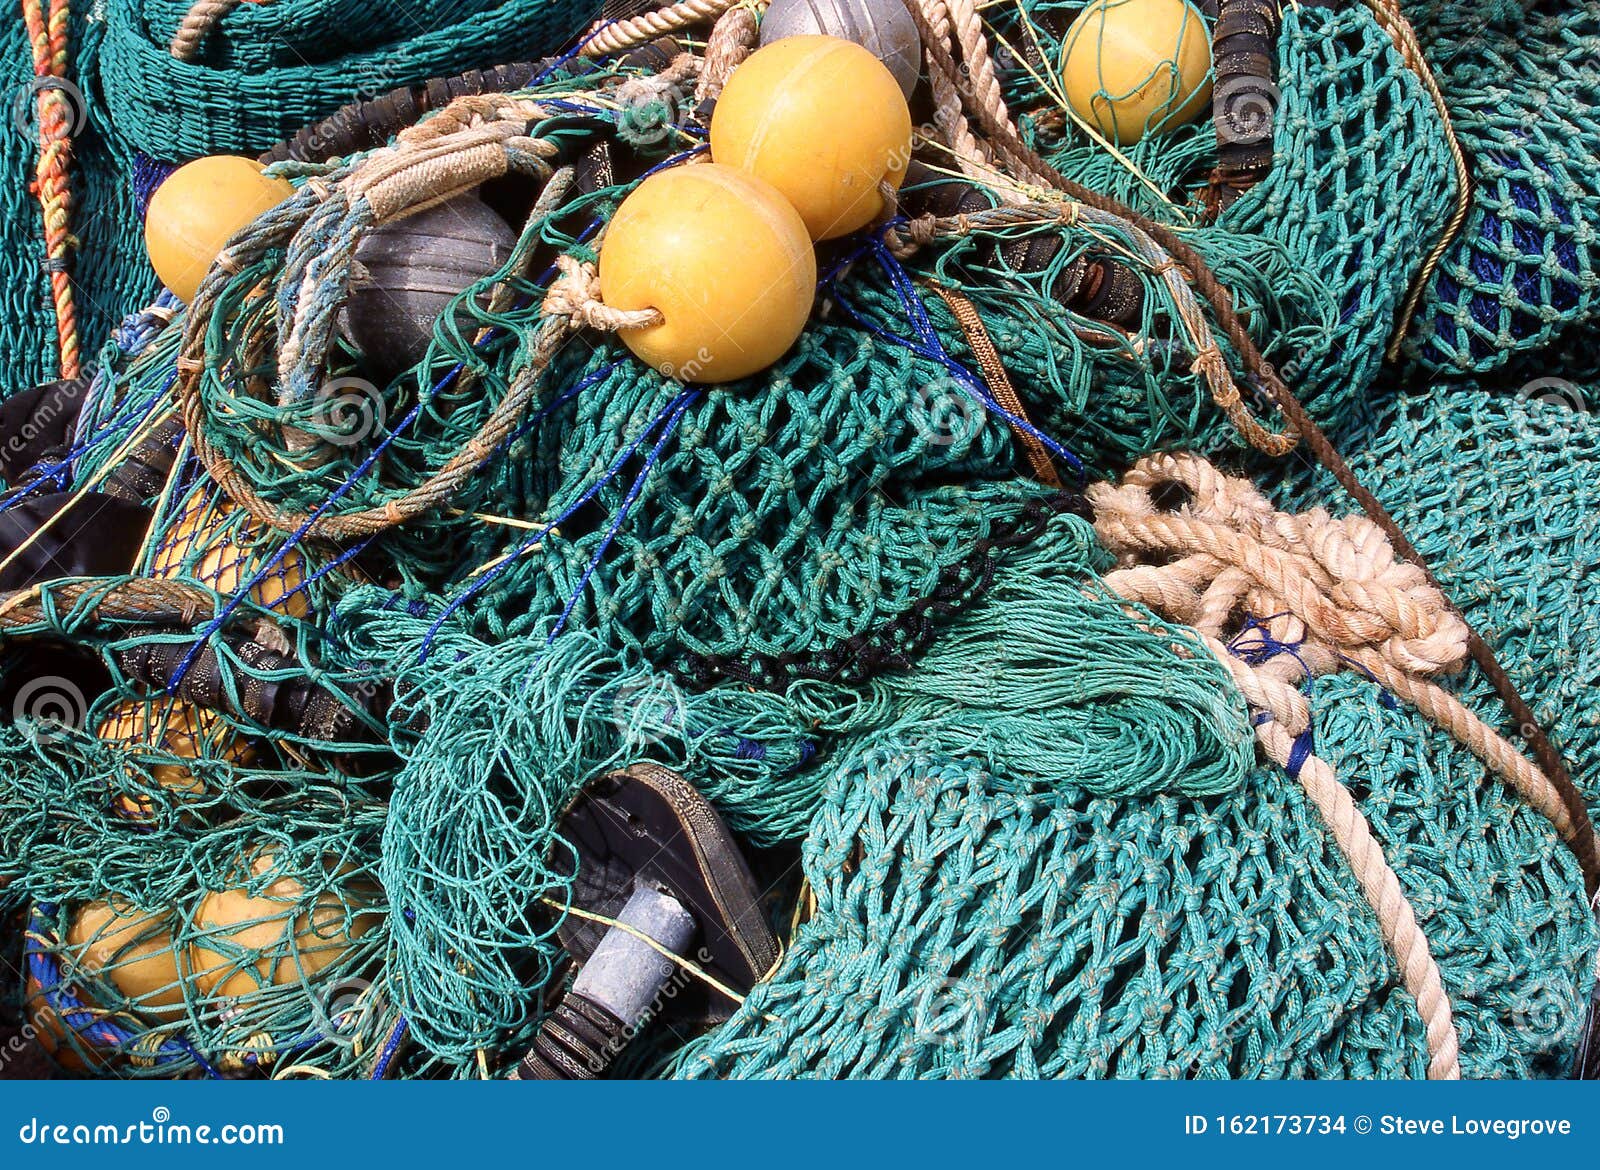 https://thumbs.dreamstime.com/z/rope-netting-commerical-fishing-nets-close-up-detail-commercial-162173734.jpg